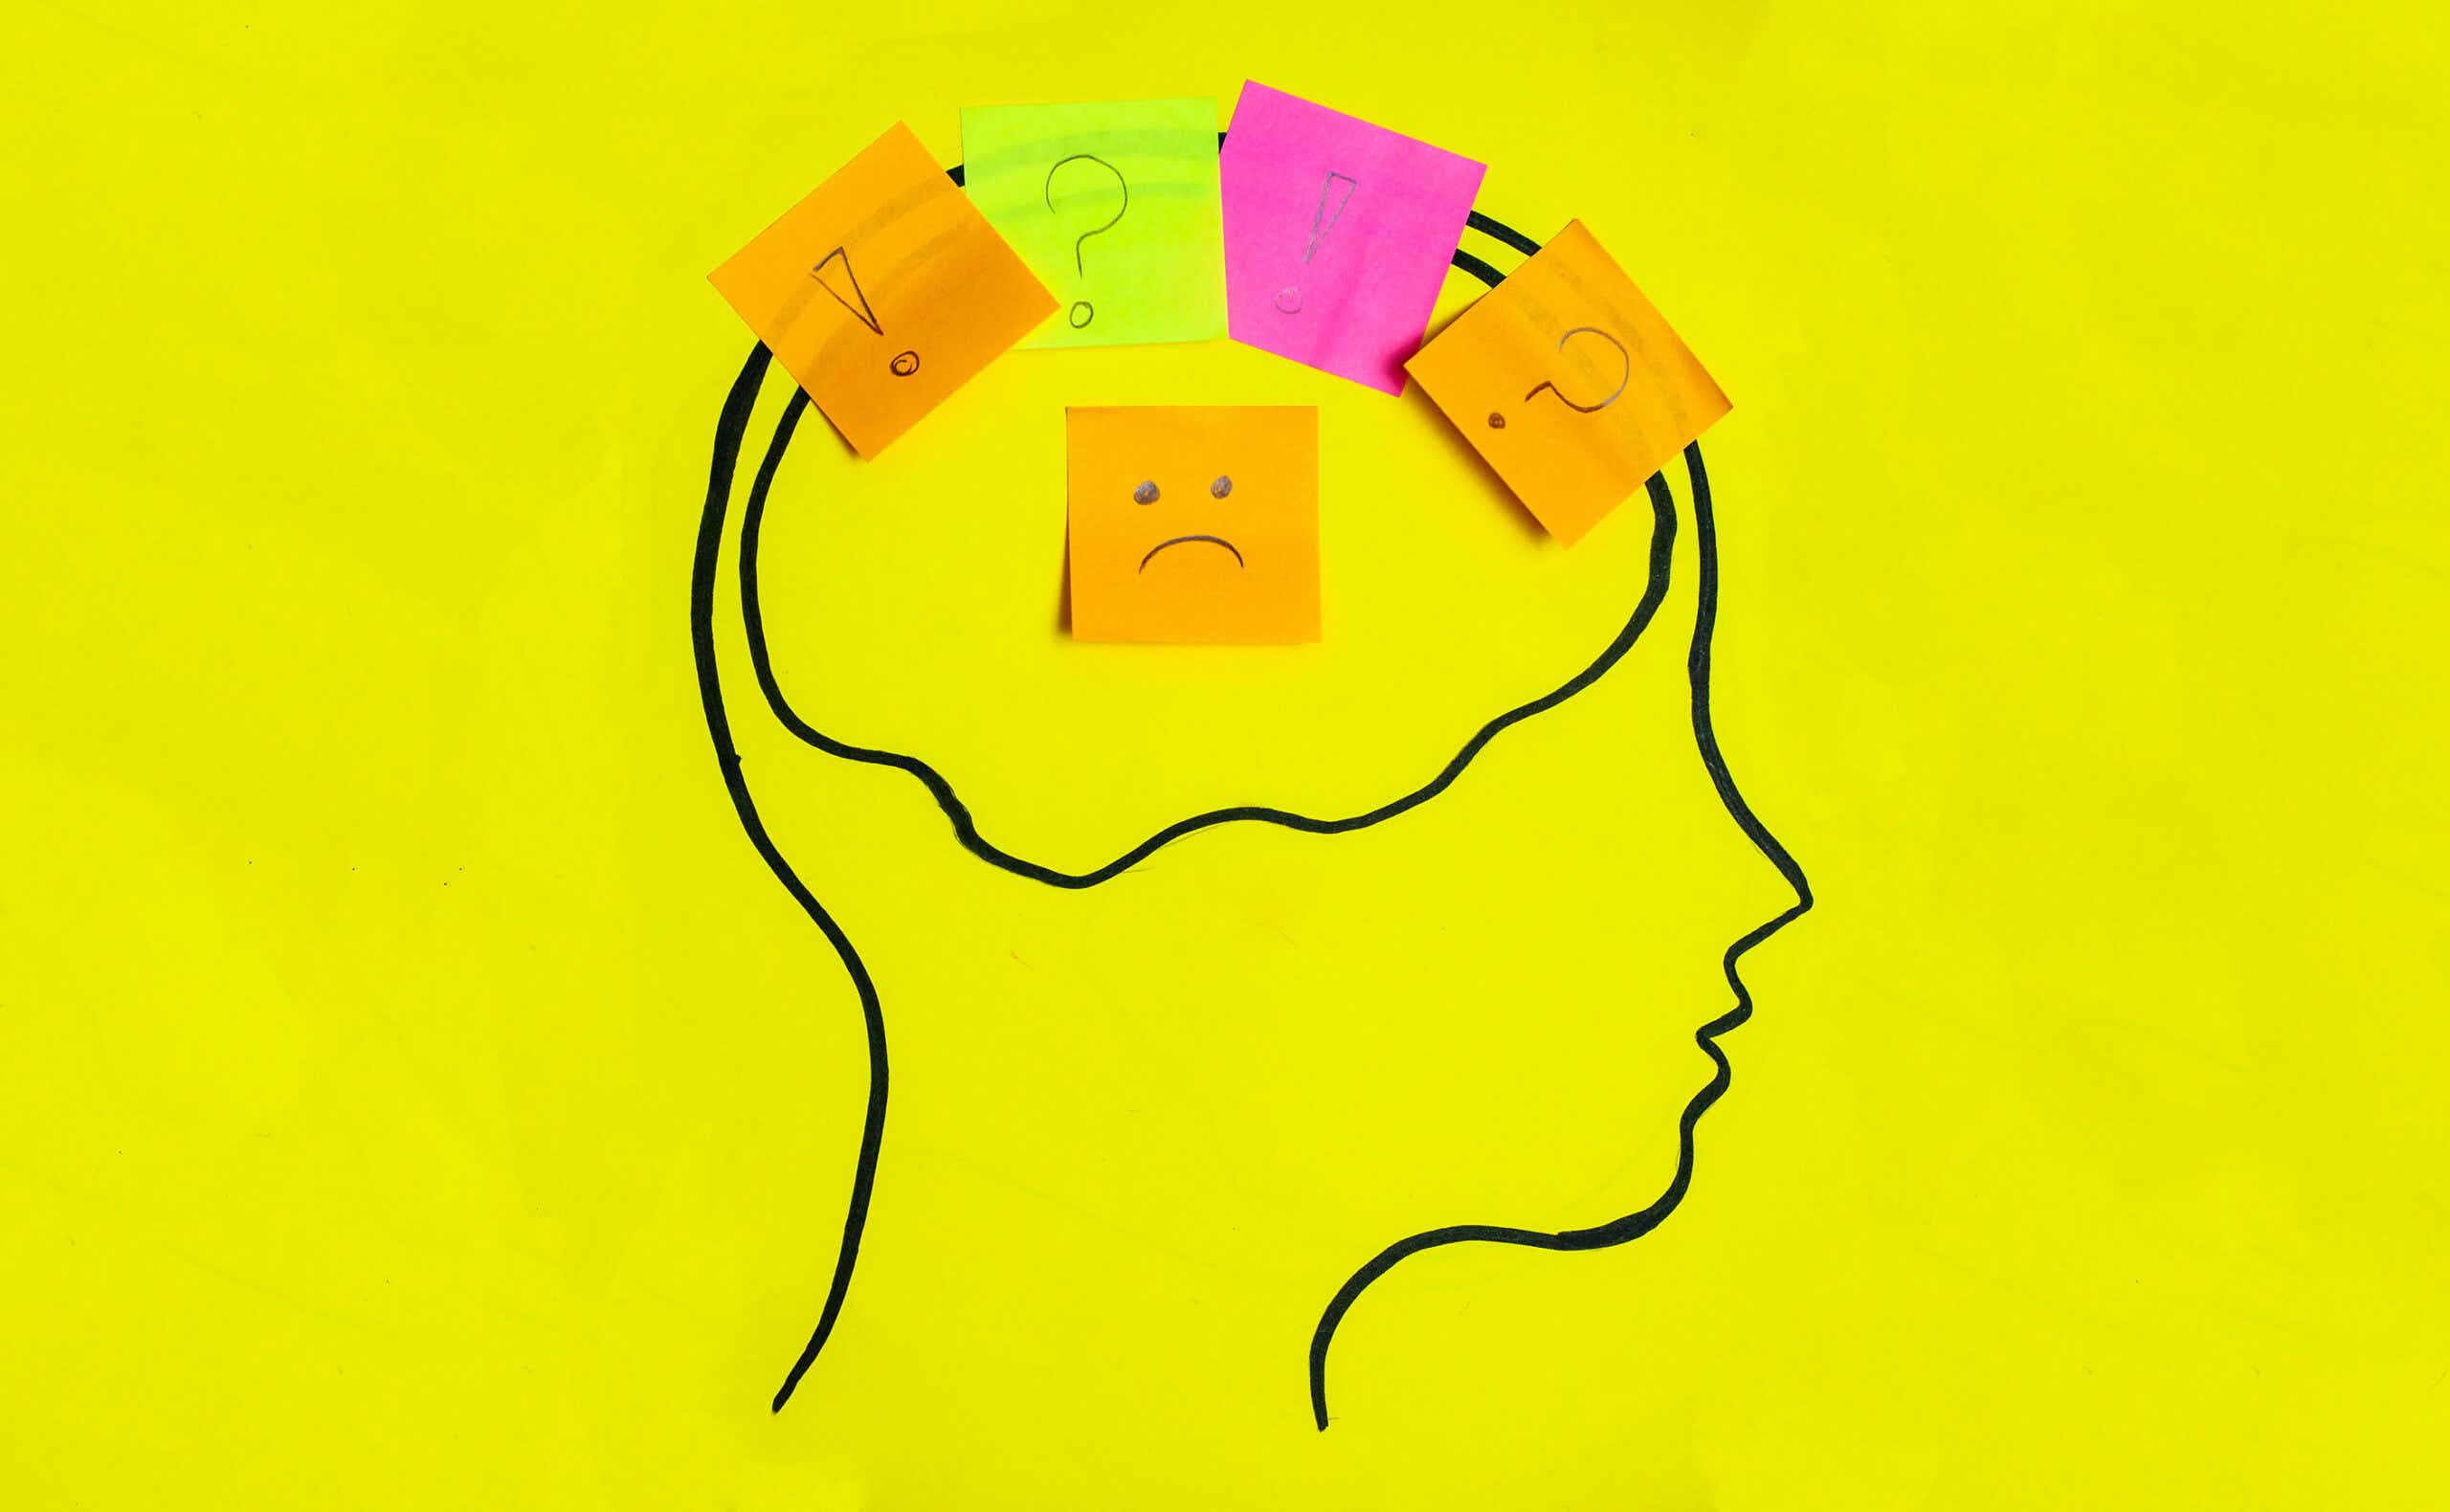 drawing of a brain with post-its on it depicting emotions